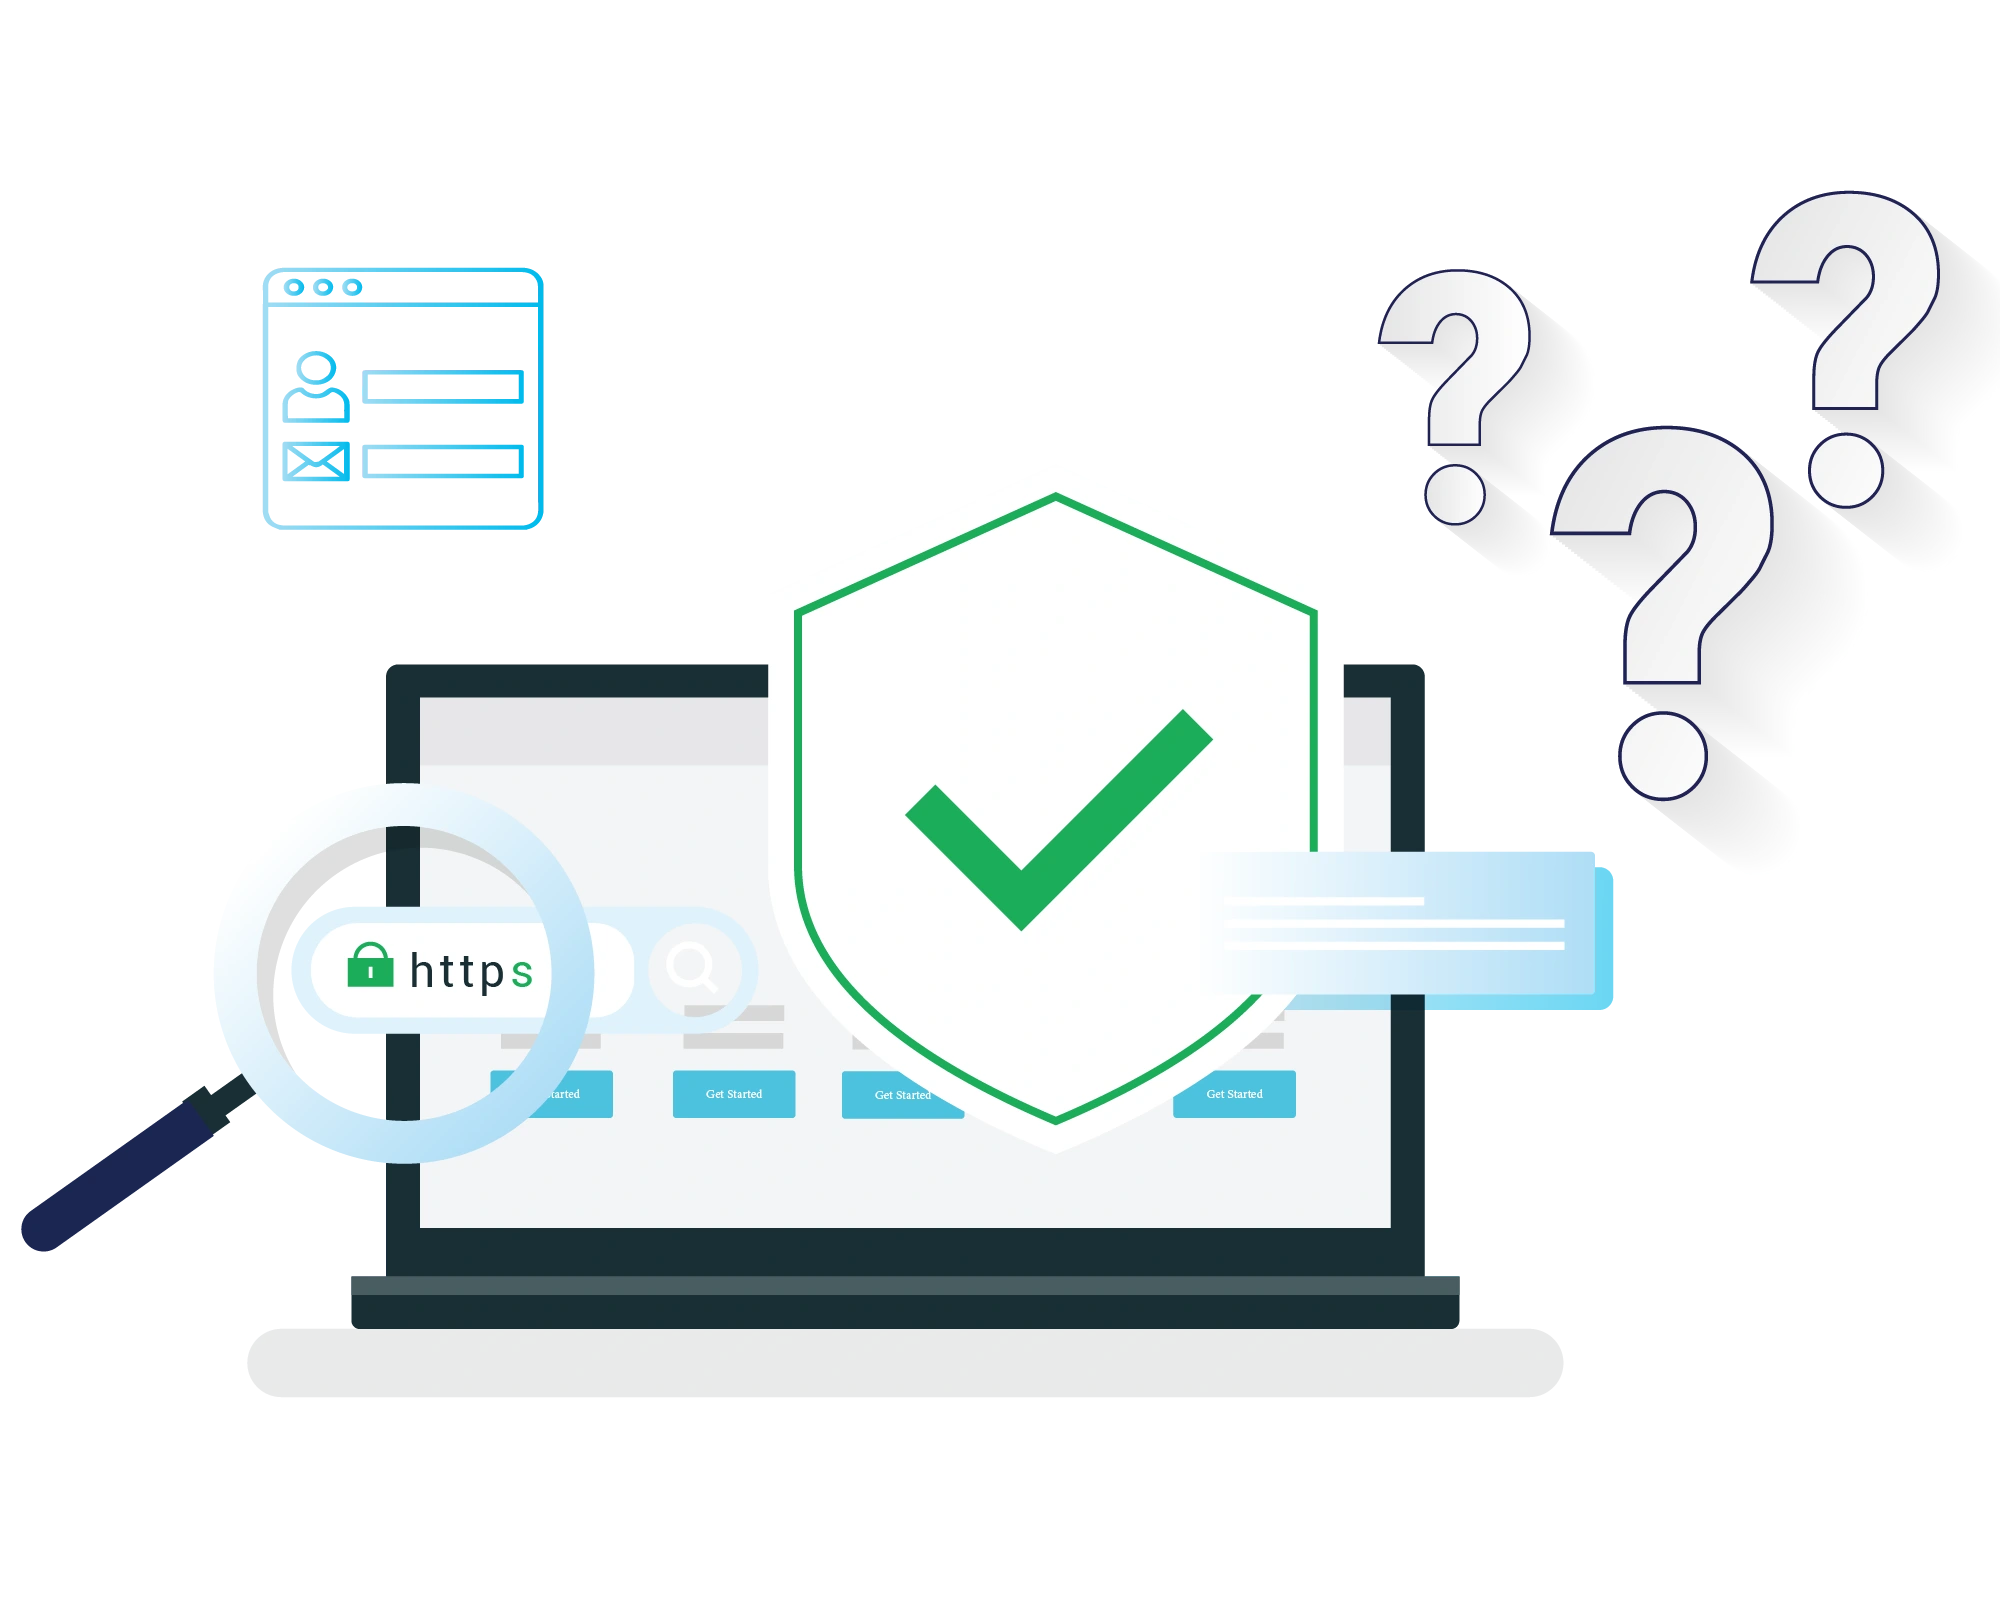 Contact us if you need help choosing the right SSL Certificate for you